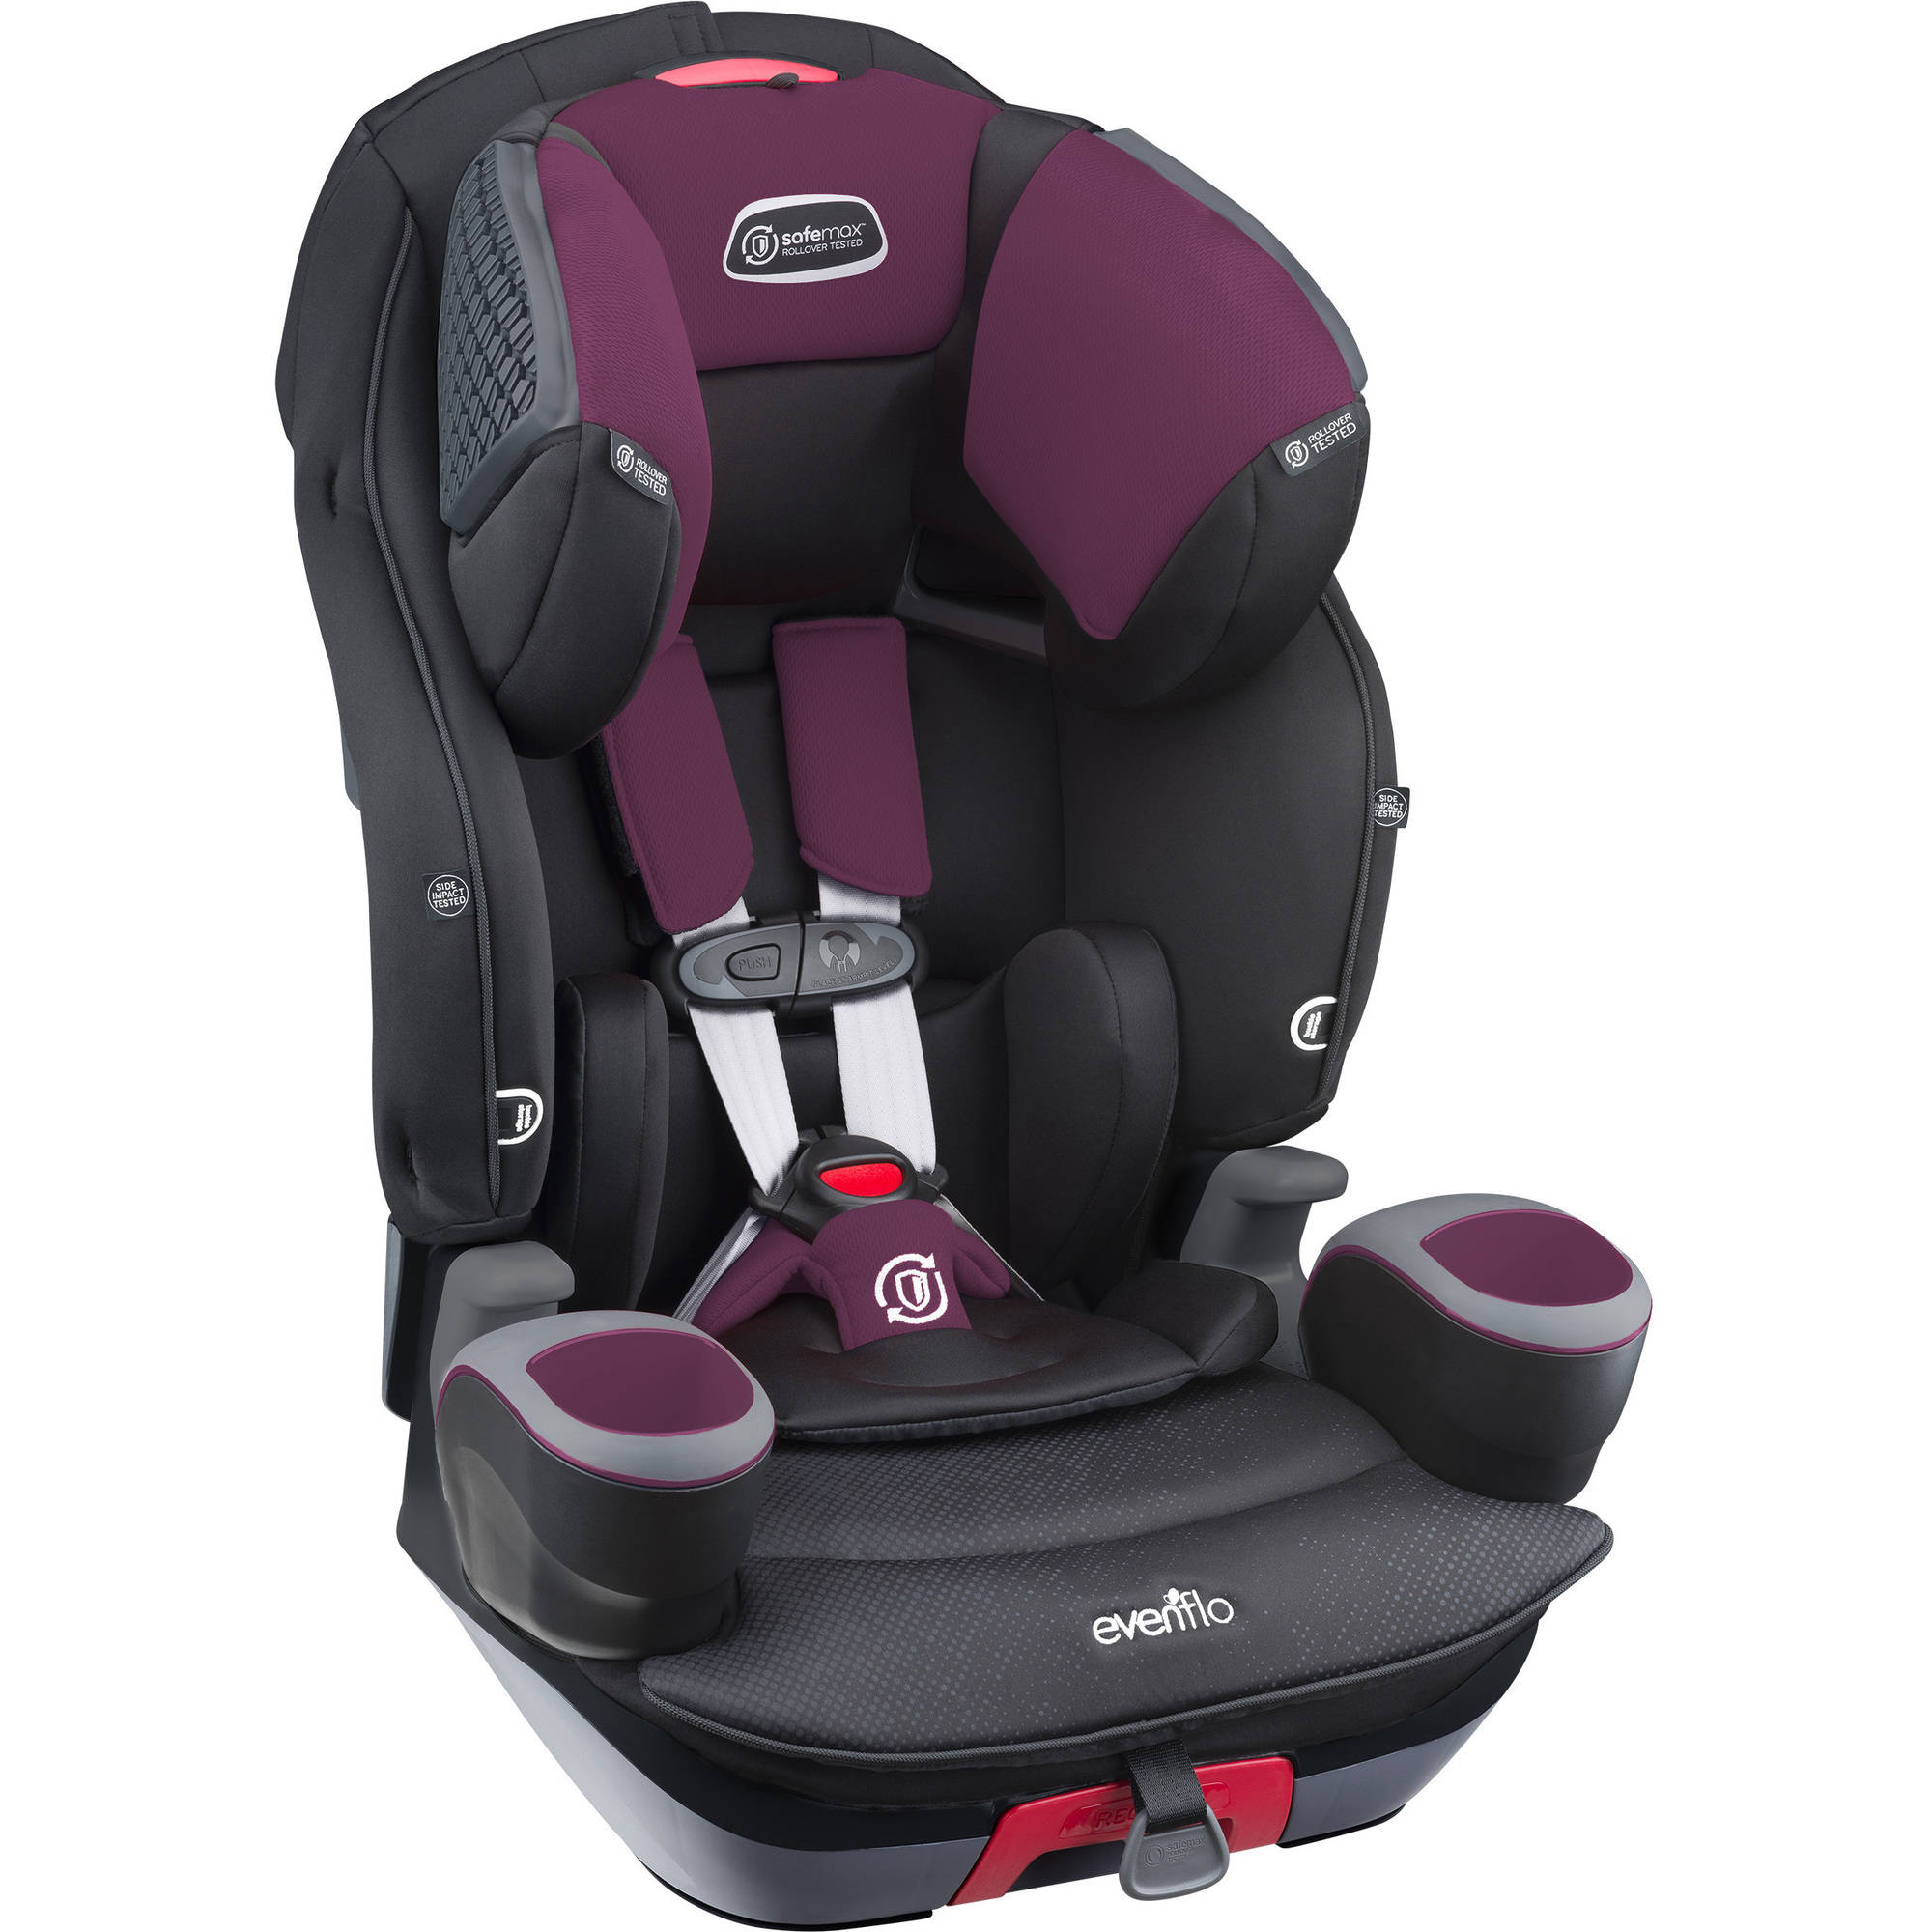 Evenflo SafeMax 3-in-1 Harness Booster Car Seat, Purple Berry - image 4 of 17